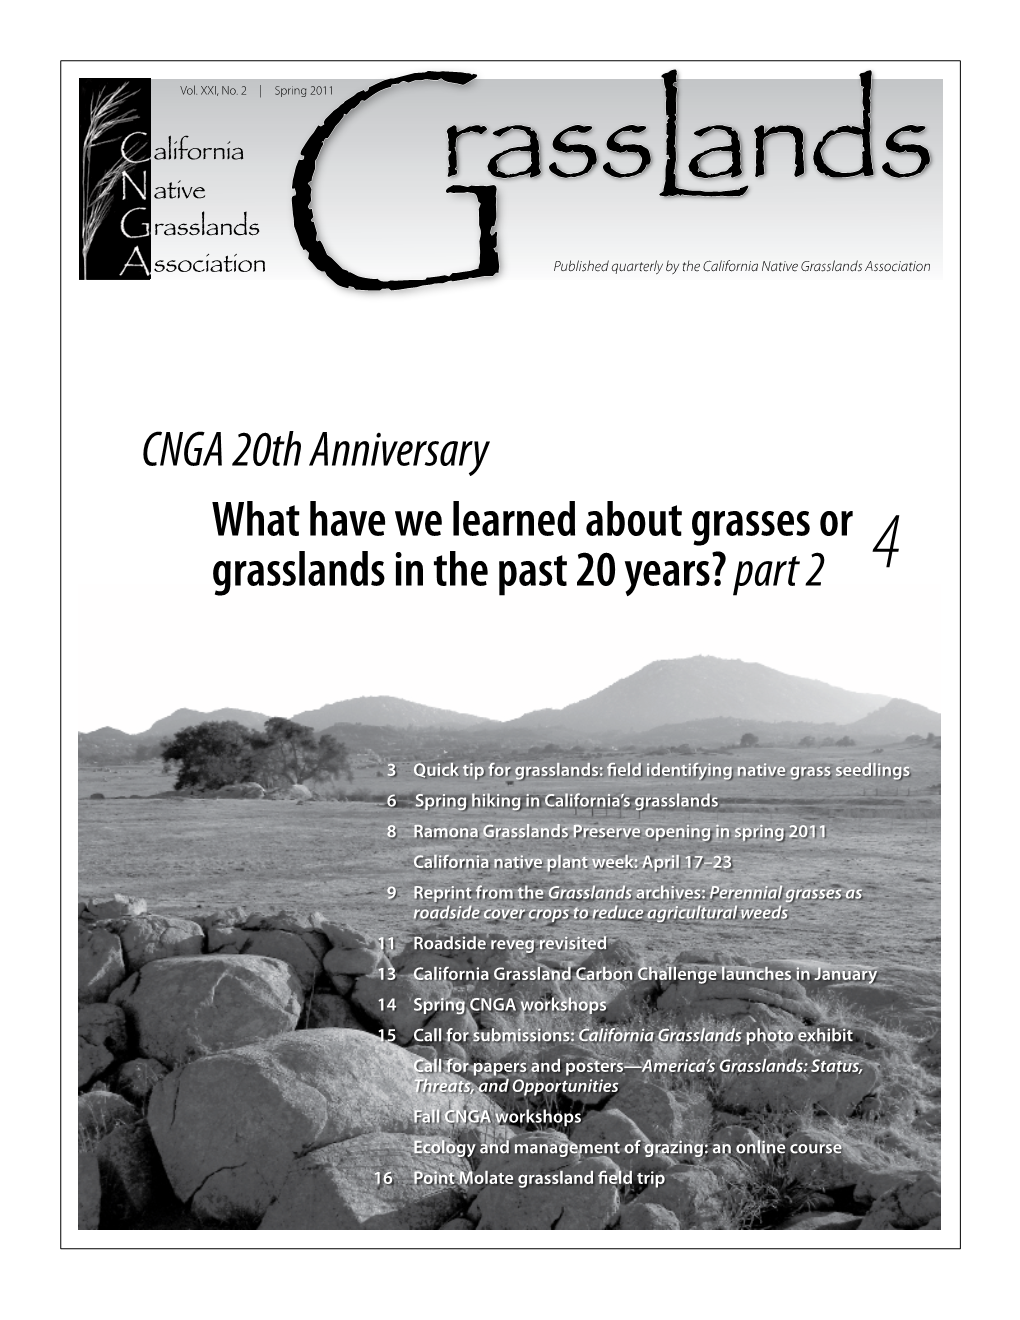 CNGA 20Th Anniversary What Have We Learned About Grasses Or Grasslands in the Past 20 Years? Part 2 4